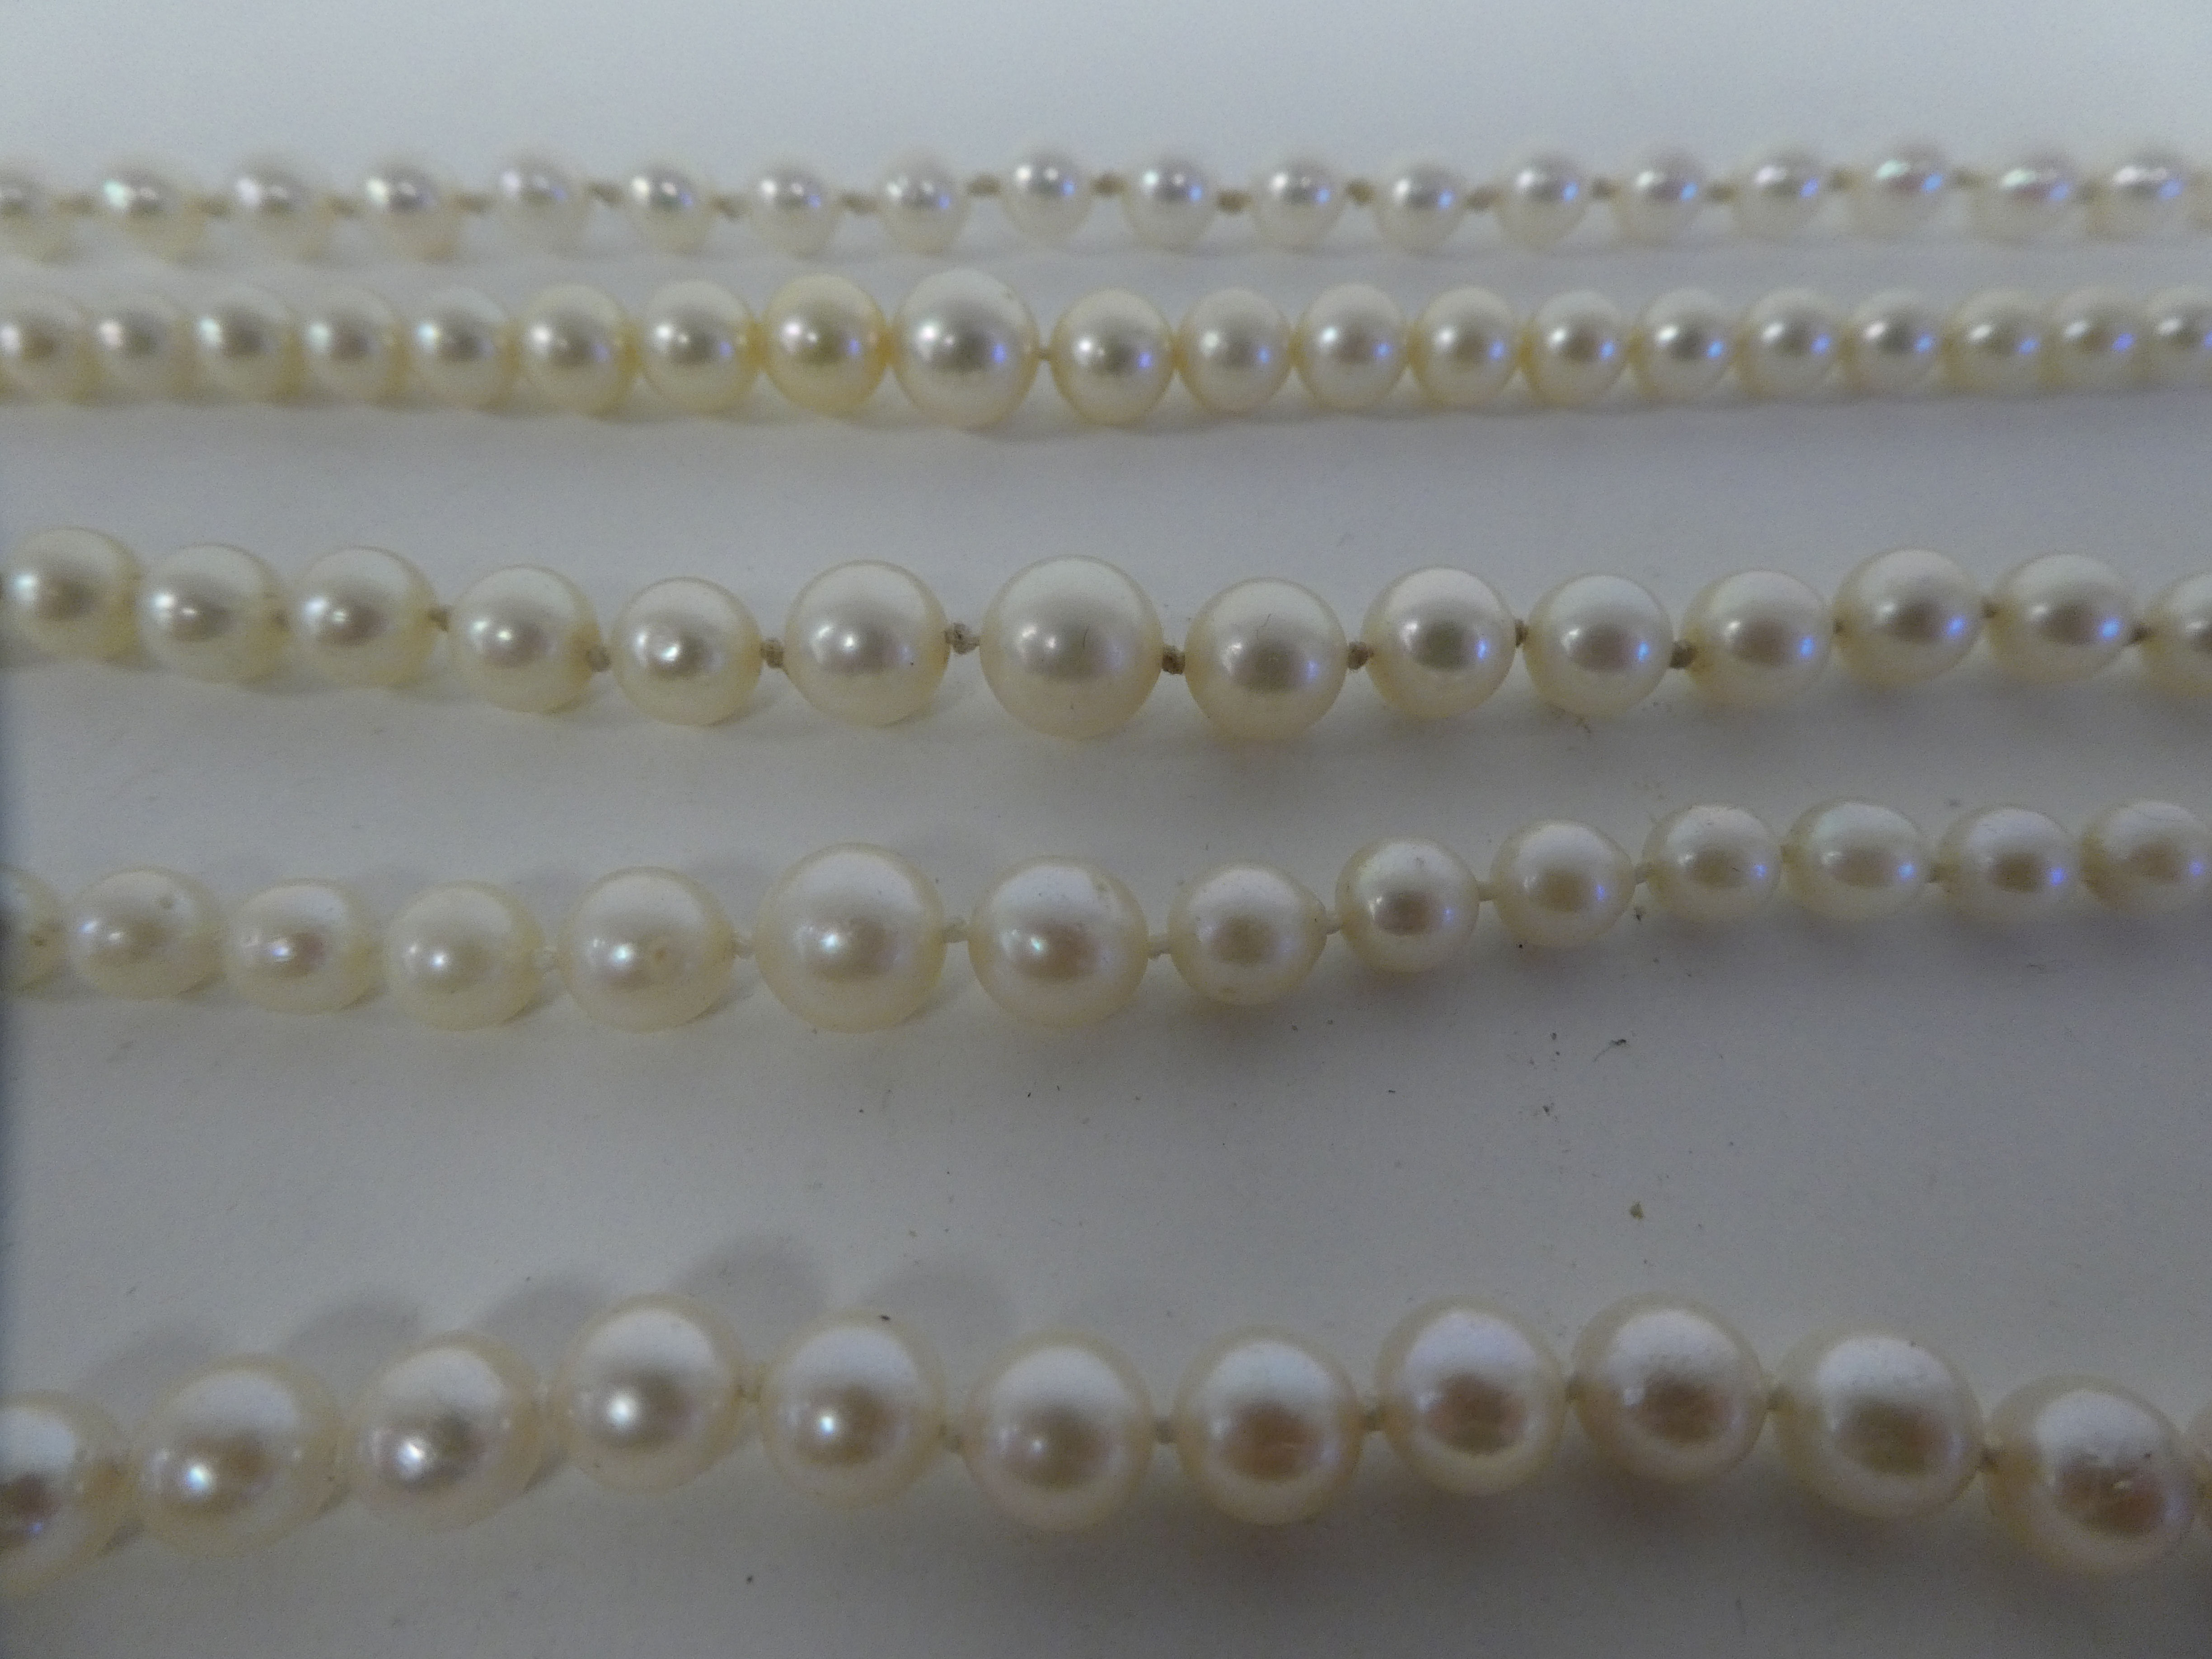 Single strand pearl necklaces - Image 2 of 5